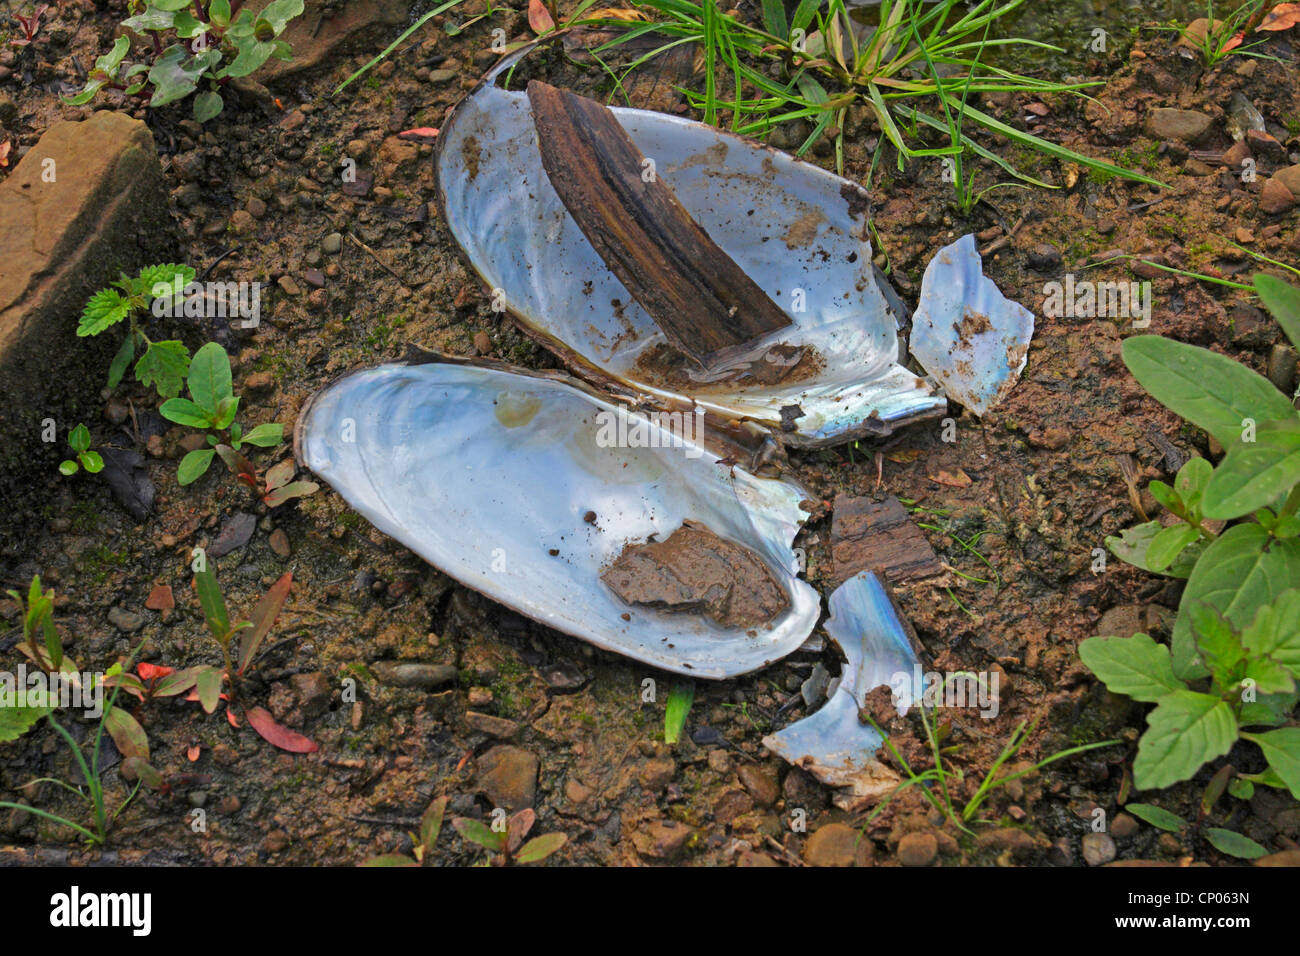 pond mussels, floaters (Anodonta spec.), empty shells on wet soil ground, Germany, Baden-Wuerttemberg Stock Photo